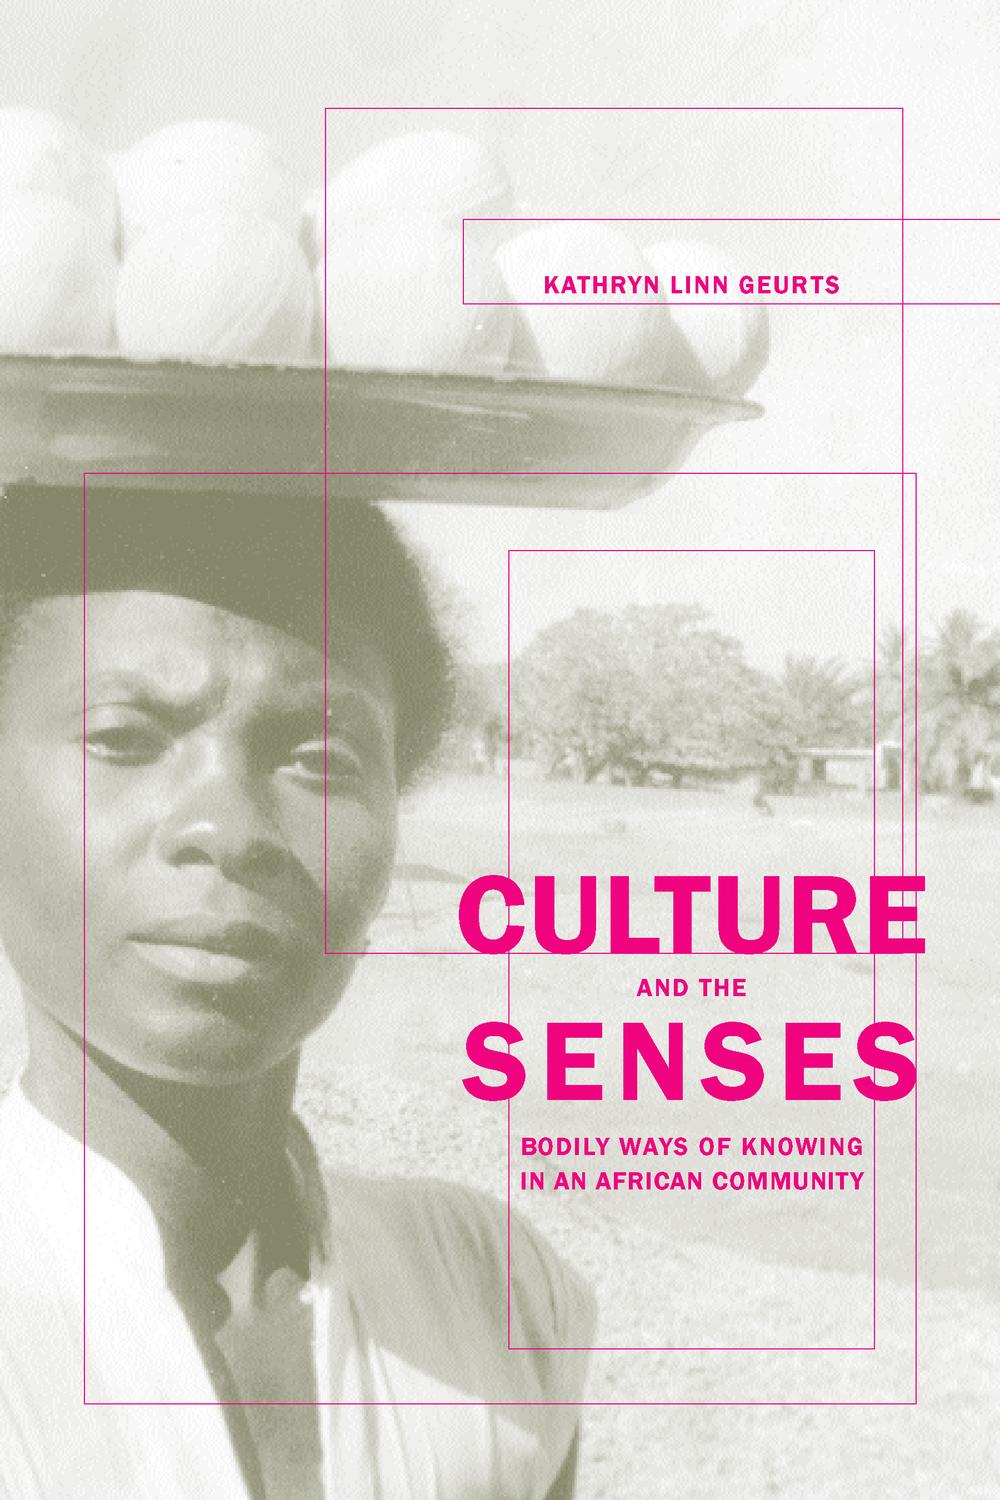 Culture and the Senses - Prof. Kathryn Geurts